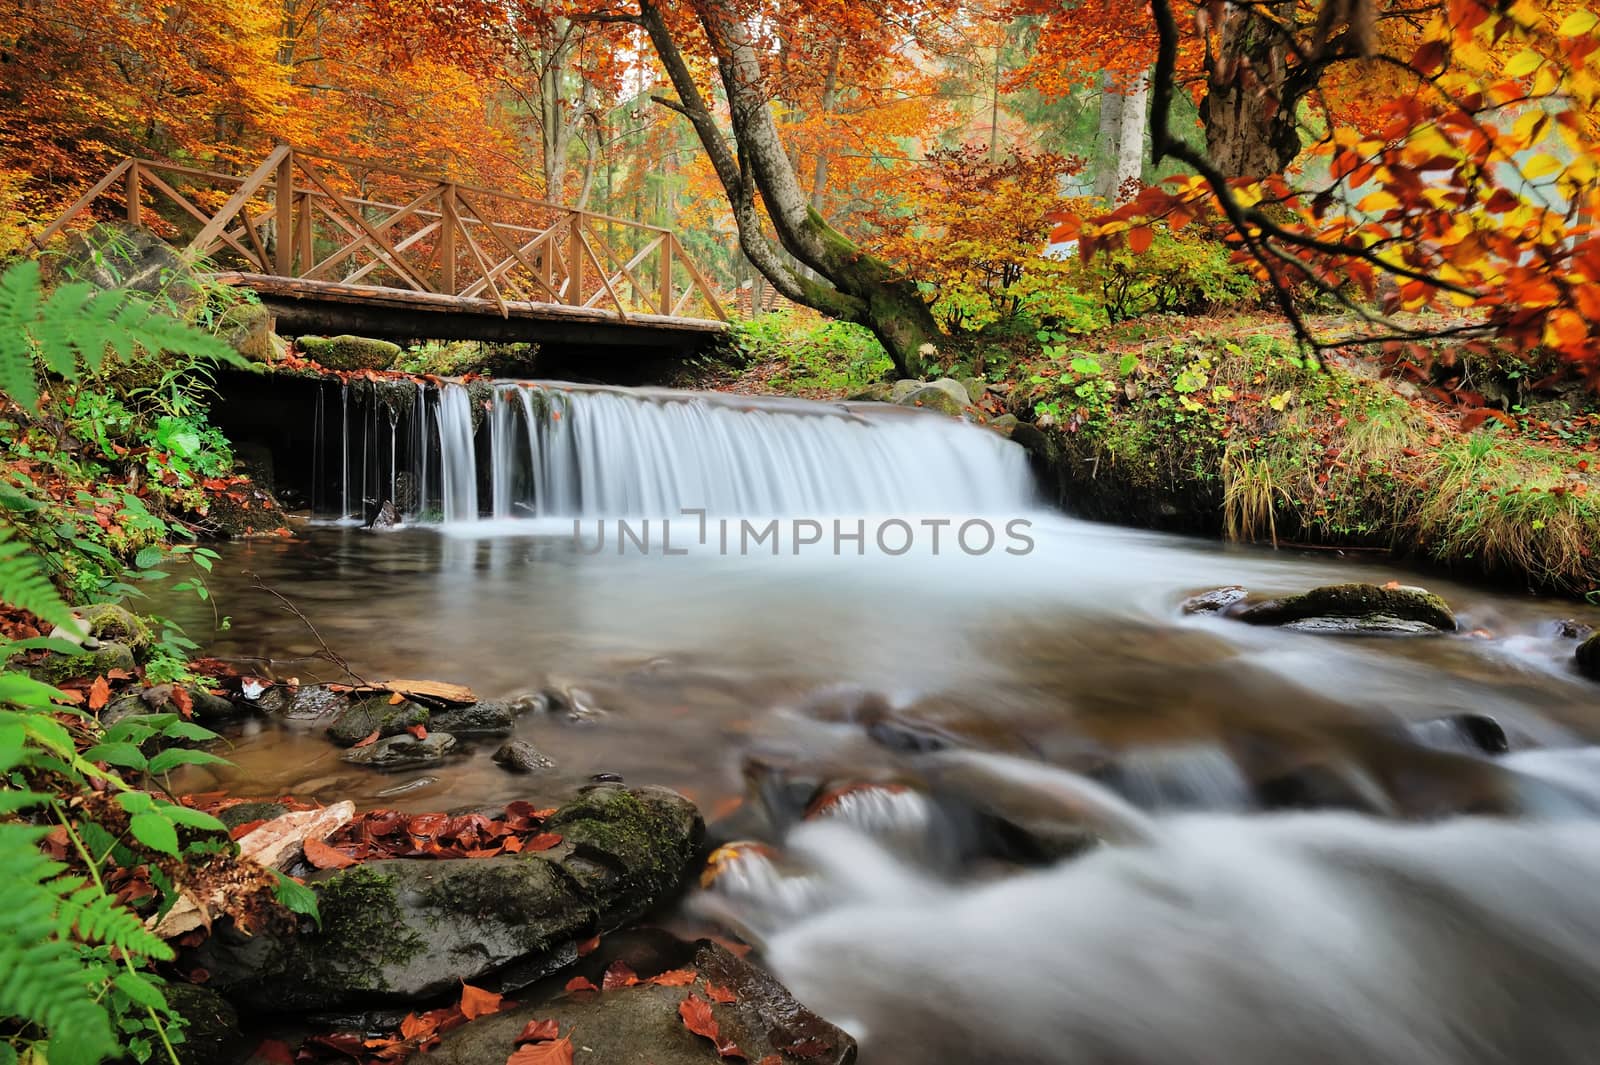 Autumn forest waterfall and rocks with yellow leaves